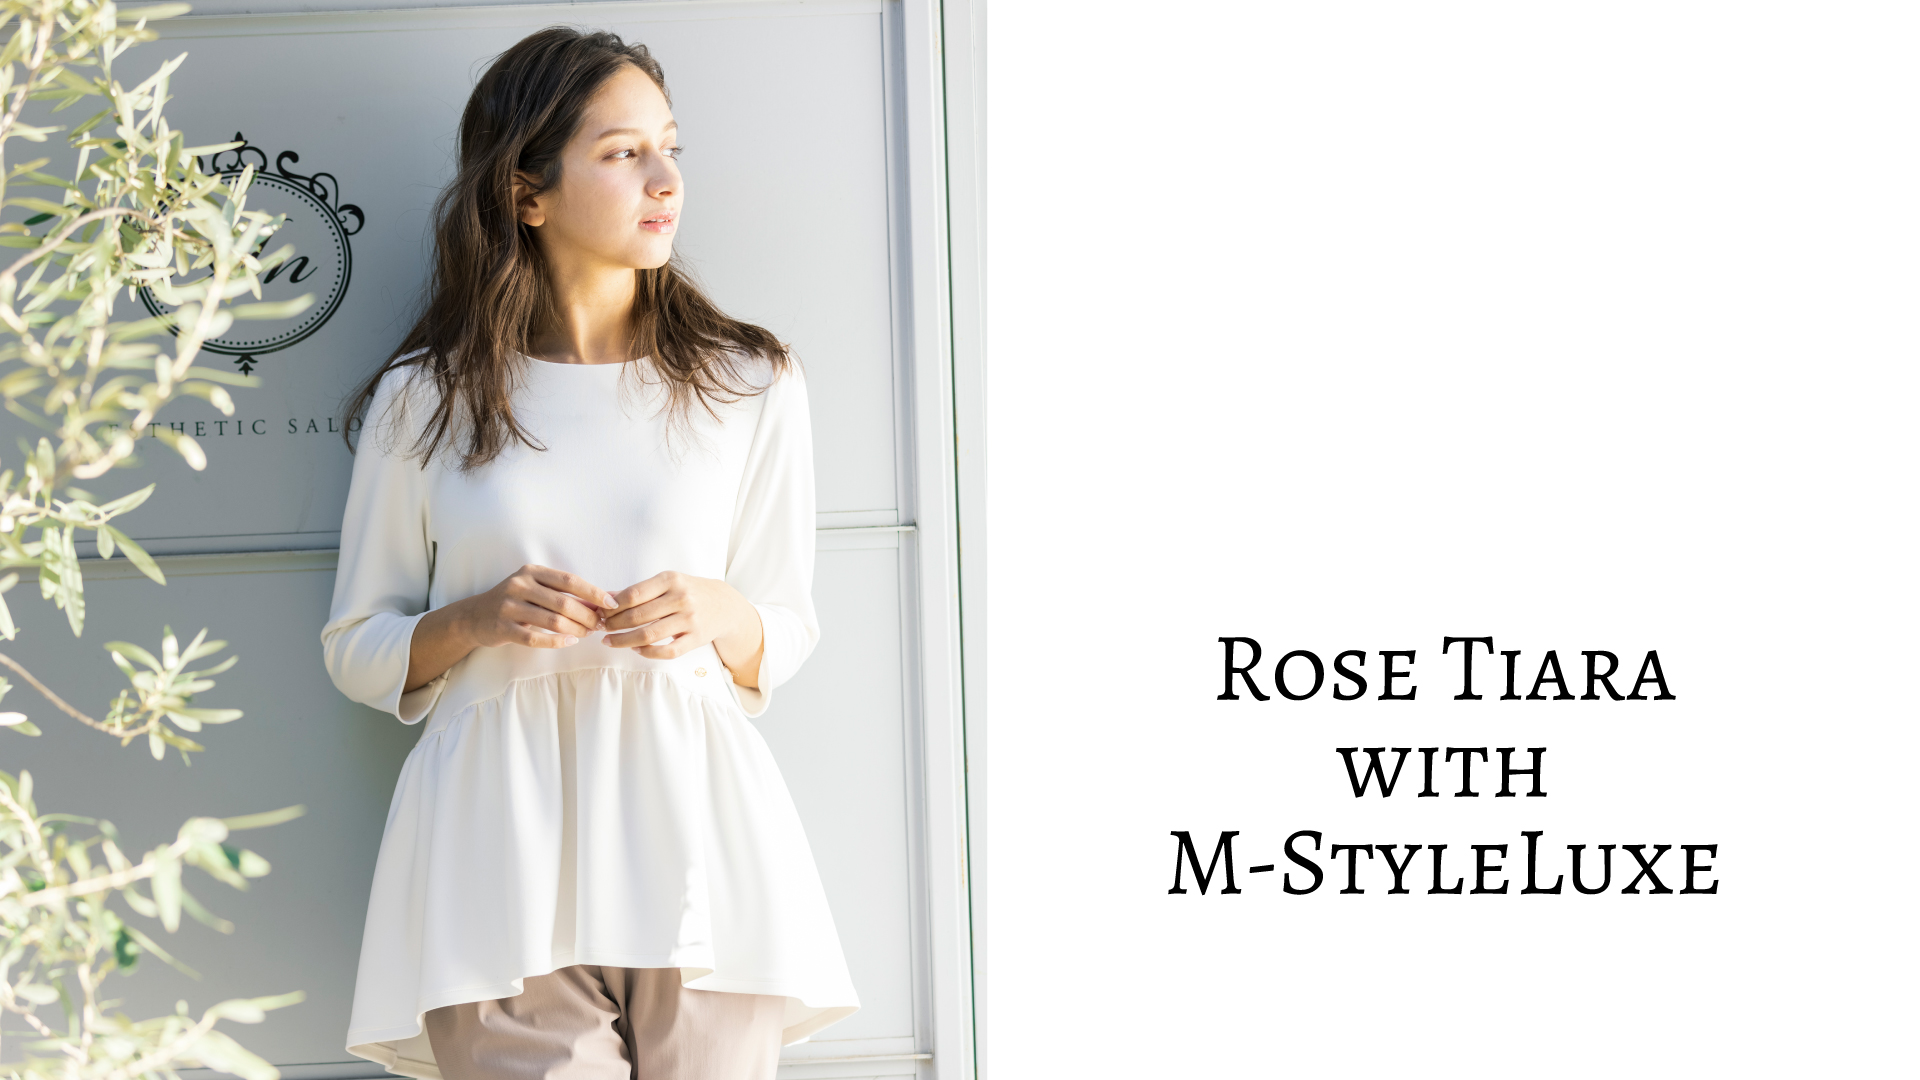 Rose Tiara with M-styleLuxe 01